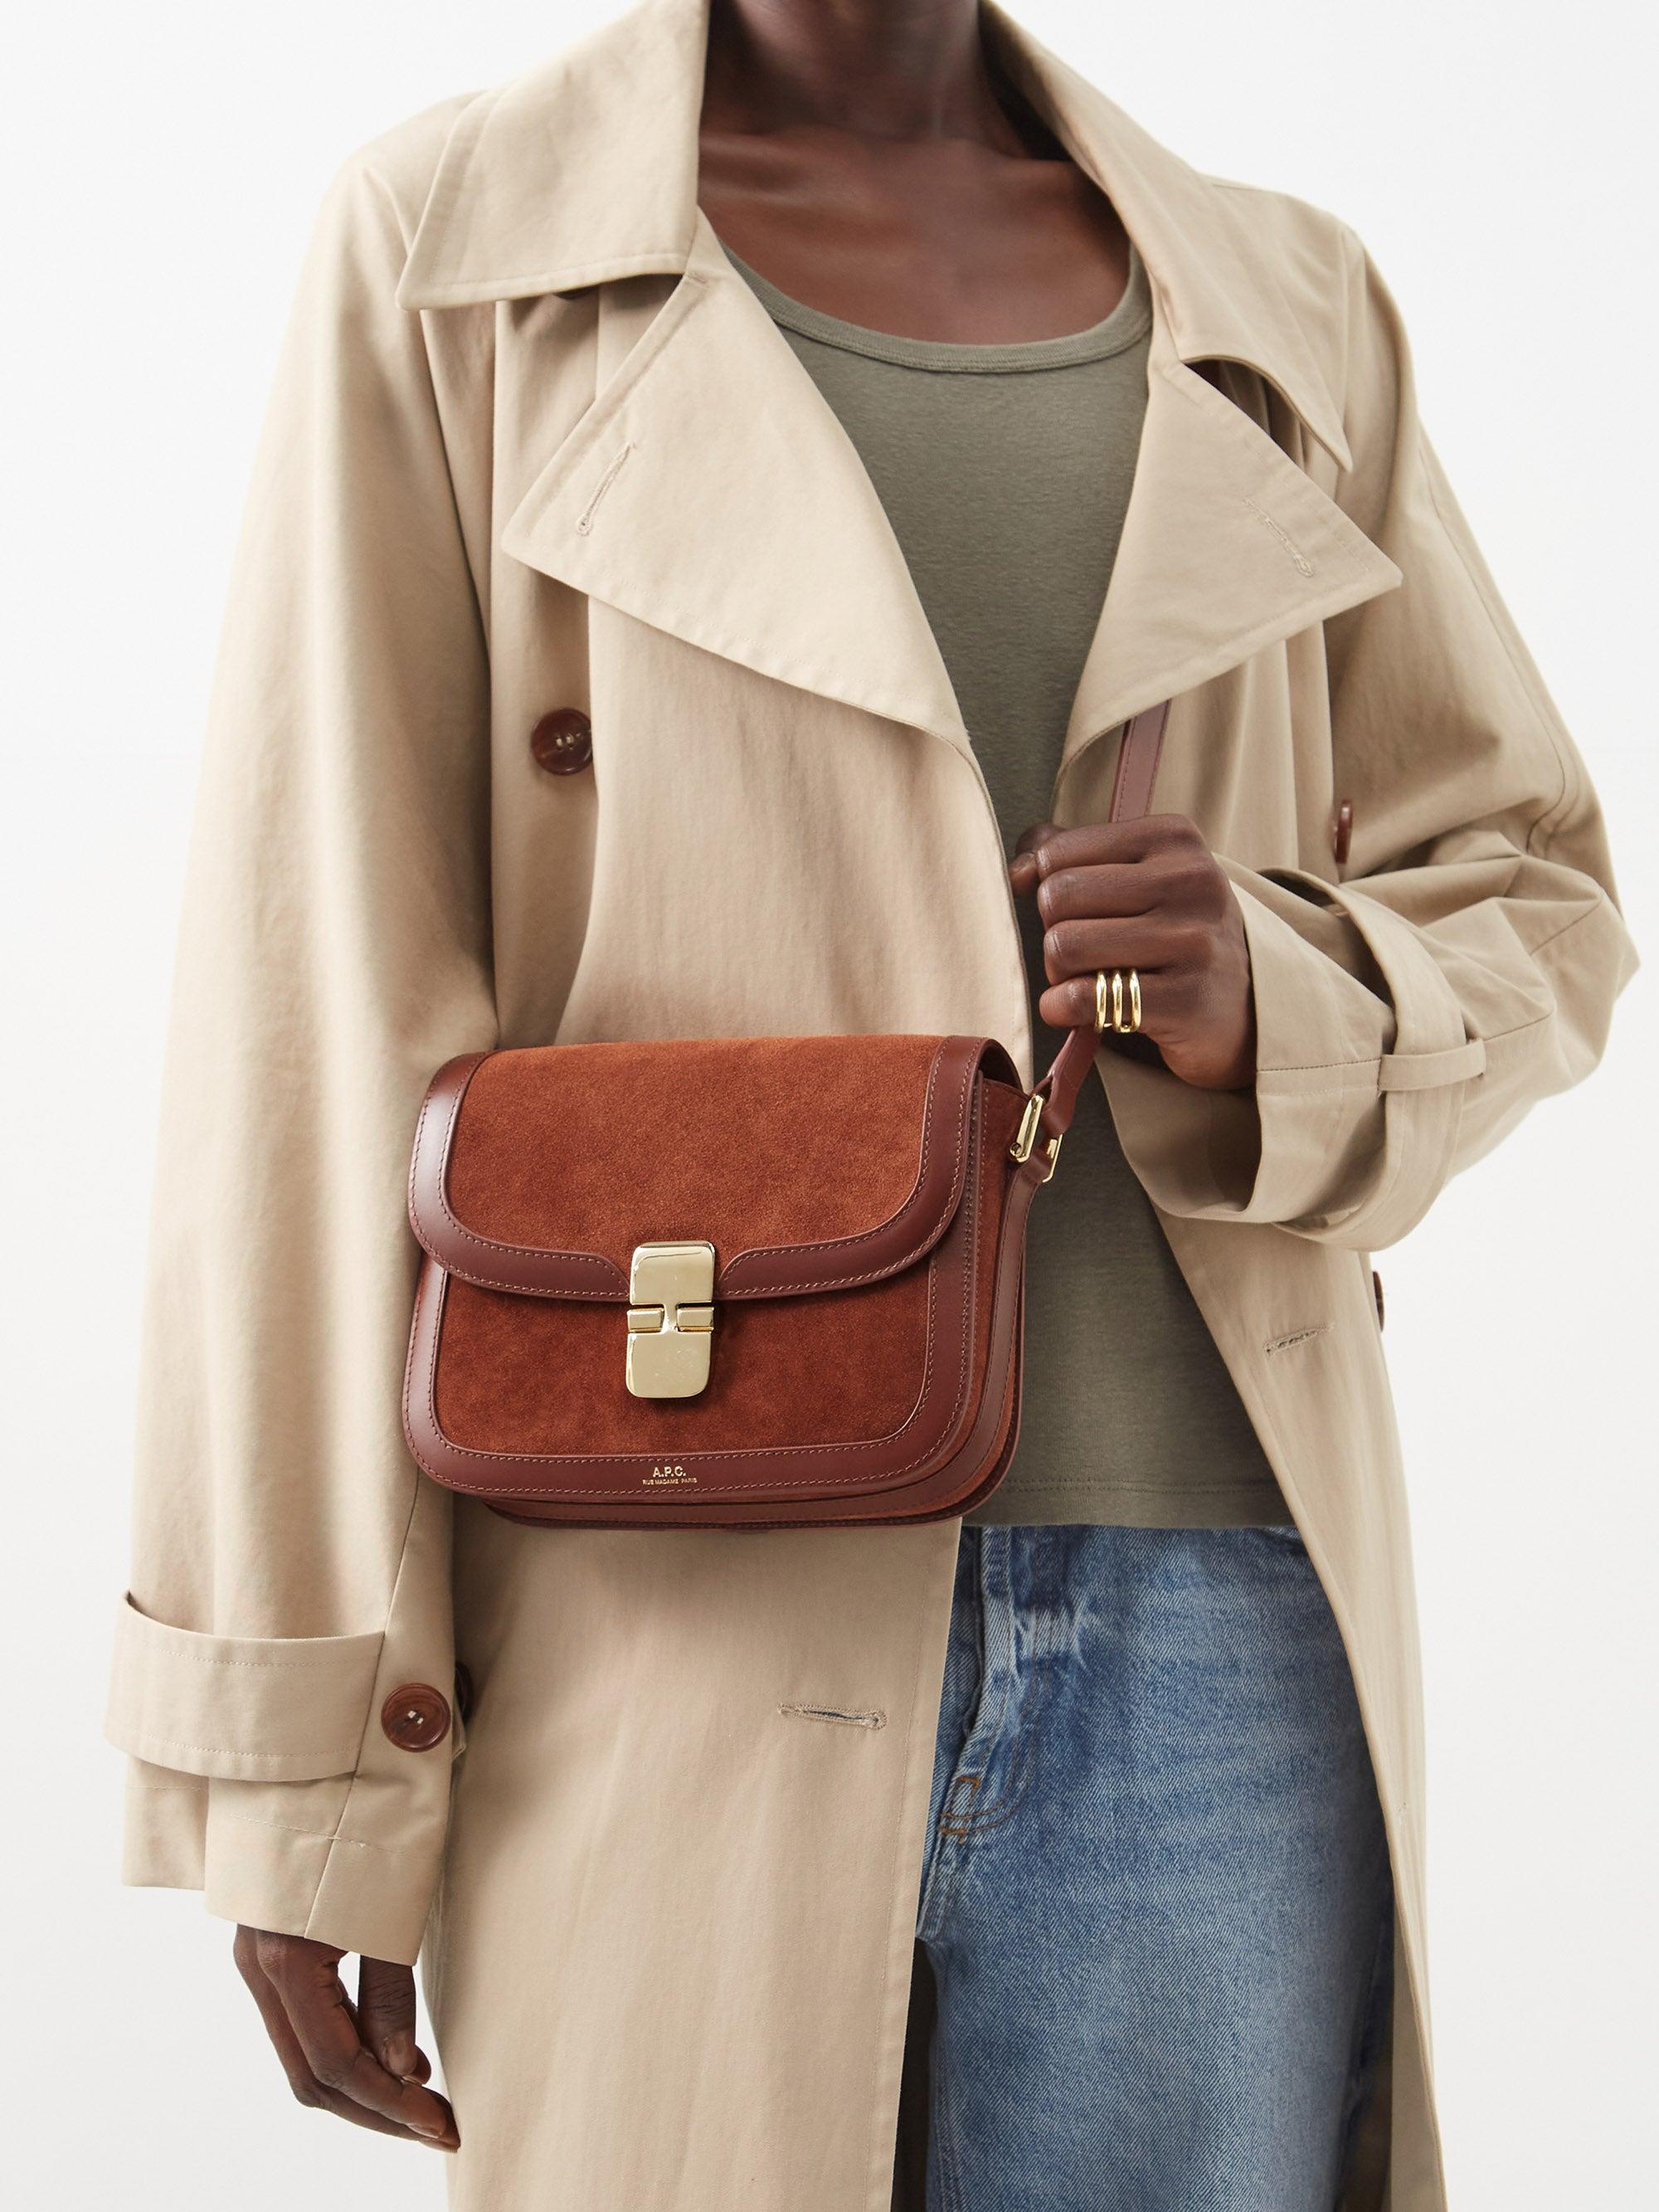 Grace Small Leather Shoulder Bag in Brown - A P C